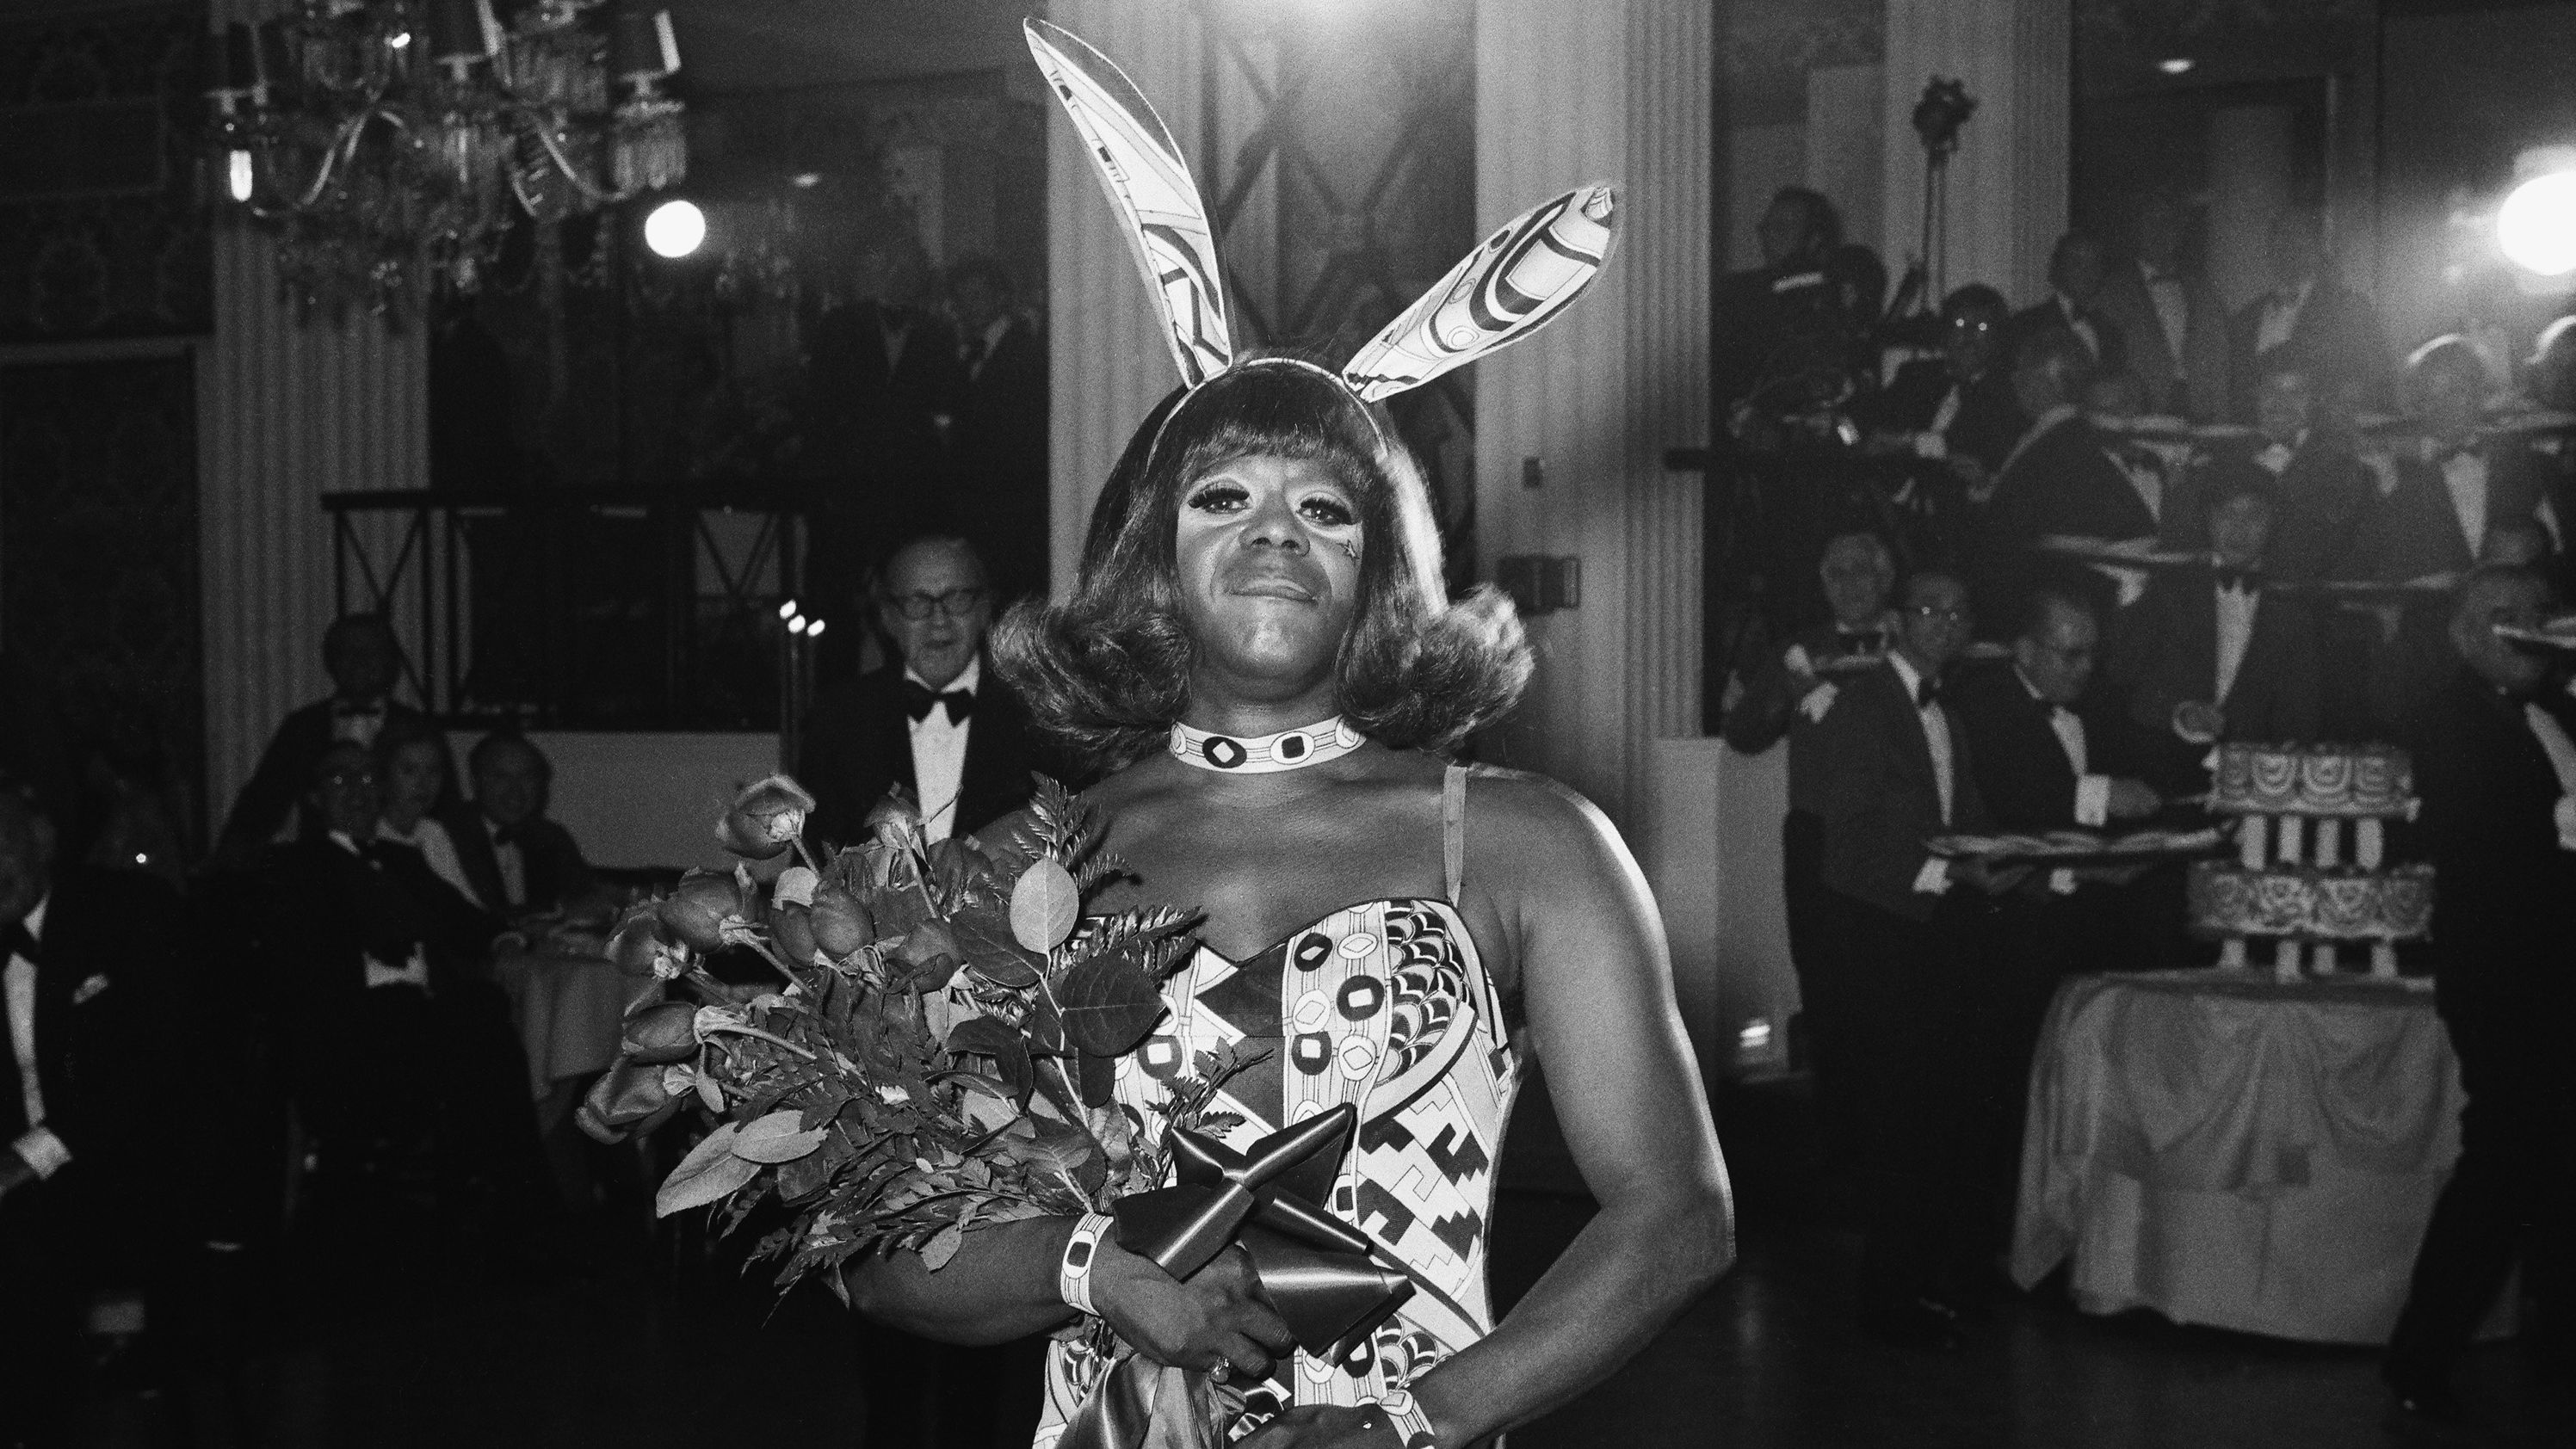 Before there was Tyler Perry's Madea, there was comedian Flip Wilson's "Geraldine." Wilson's character was a gender bending star of his popular television variety show.